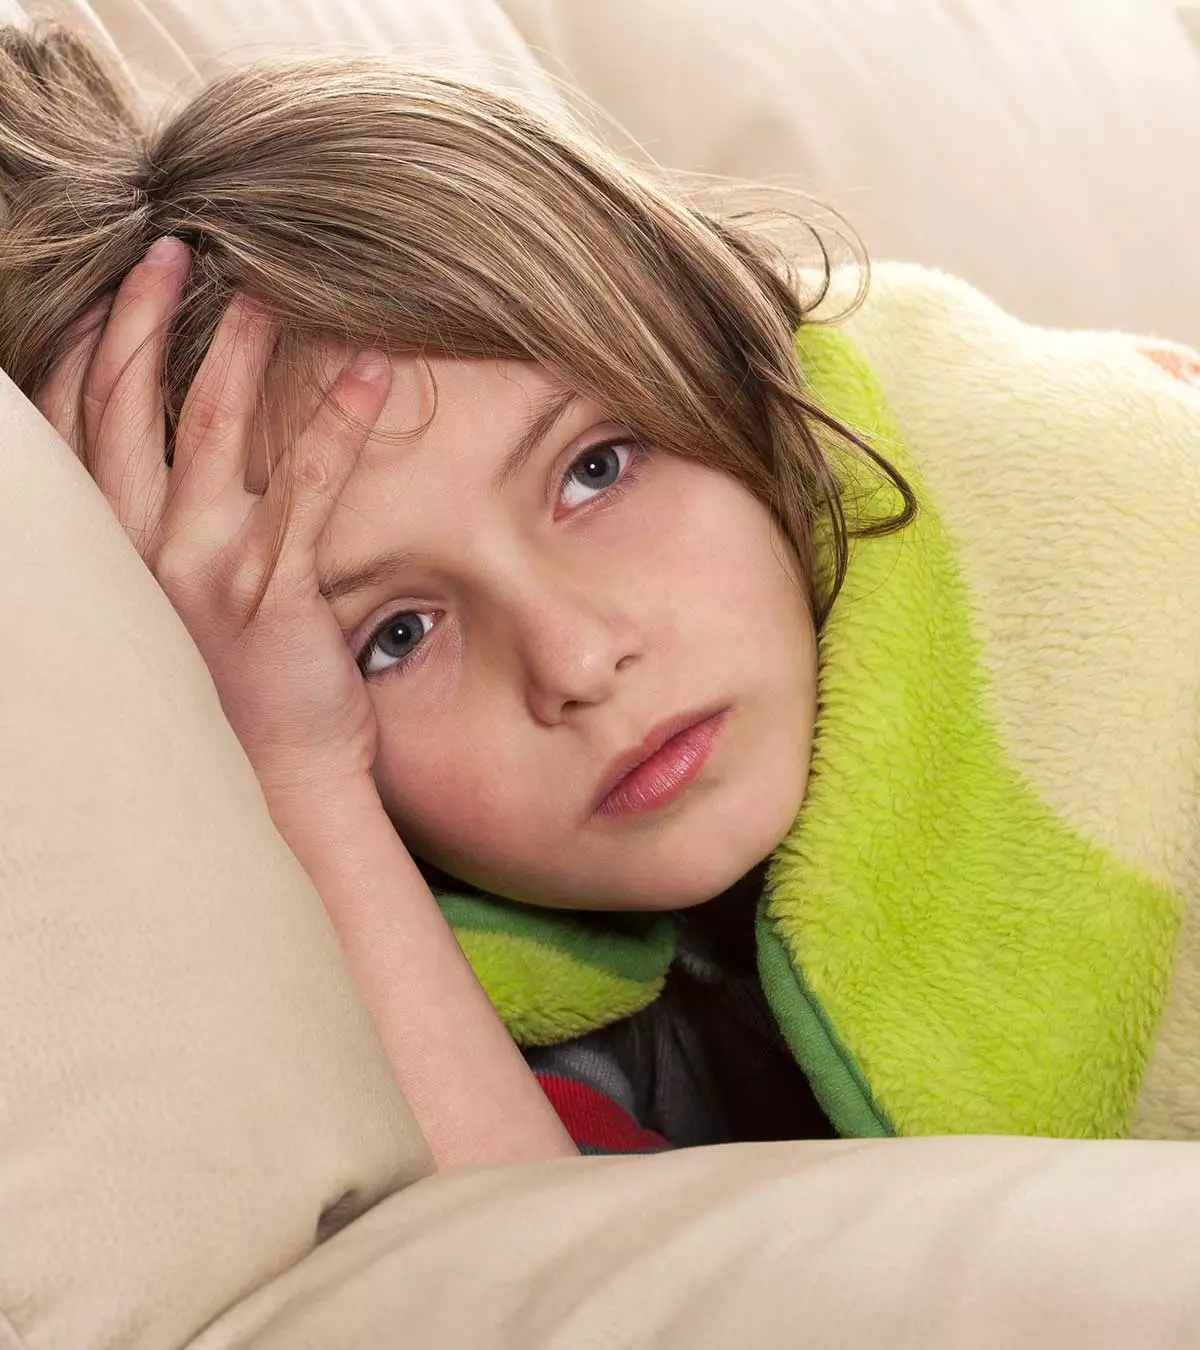 17 Causes Of Nausea In Children, Treatment And Home Remedies_image